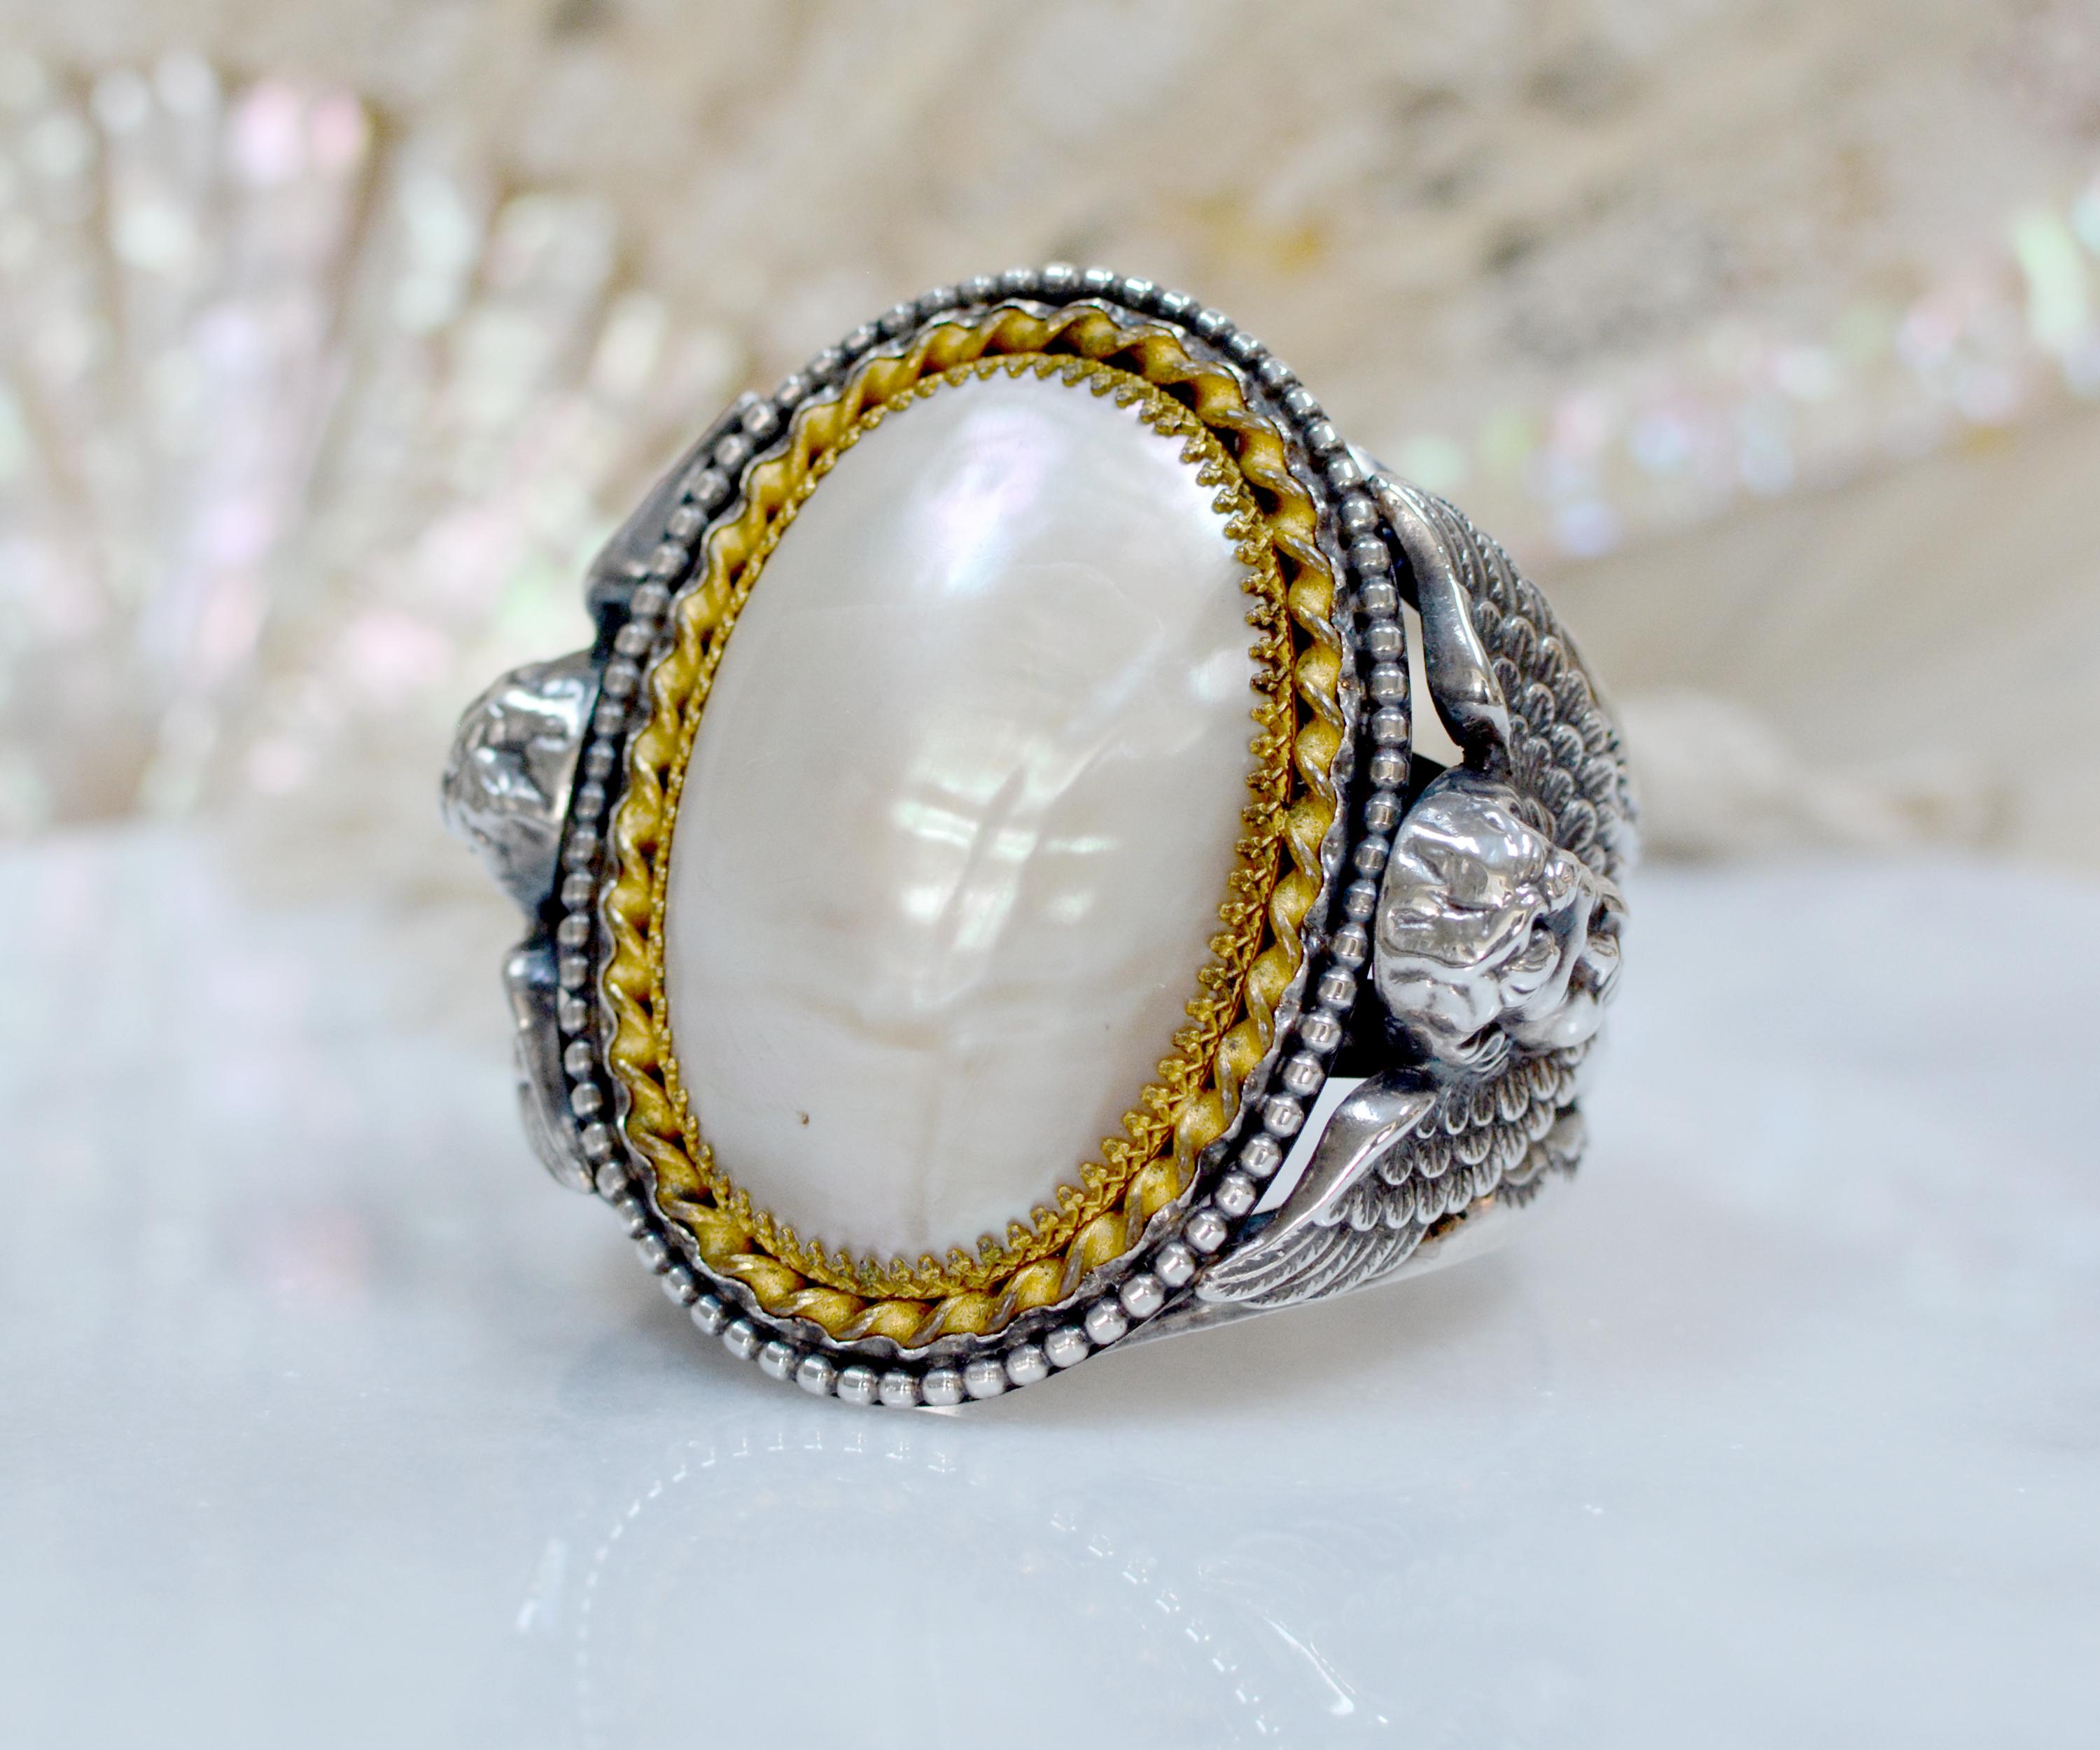 Jill Garber has designed this truly unforgettable, grand cuff bracelet around an exquisitely large nineteenth century Victorian high dome Mother of Pearl cabochon. Discovered in such lovely condition with meticulously engraved gold vermeil gallery